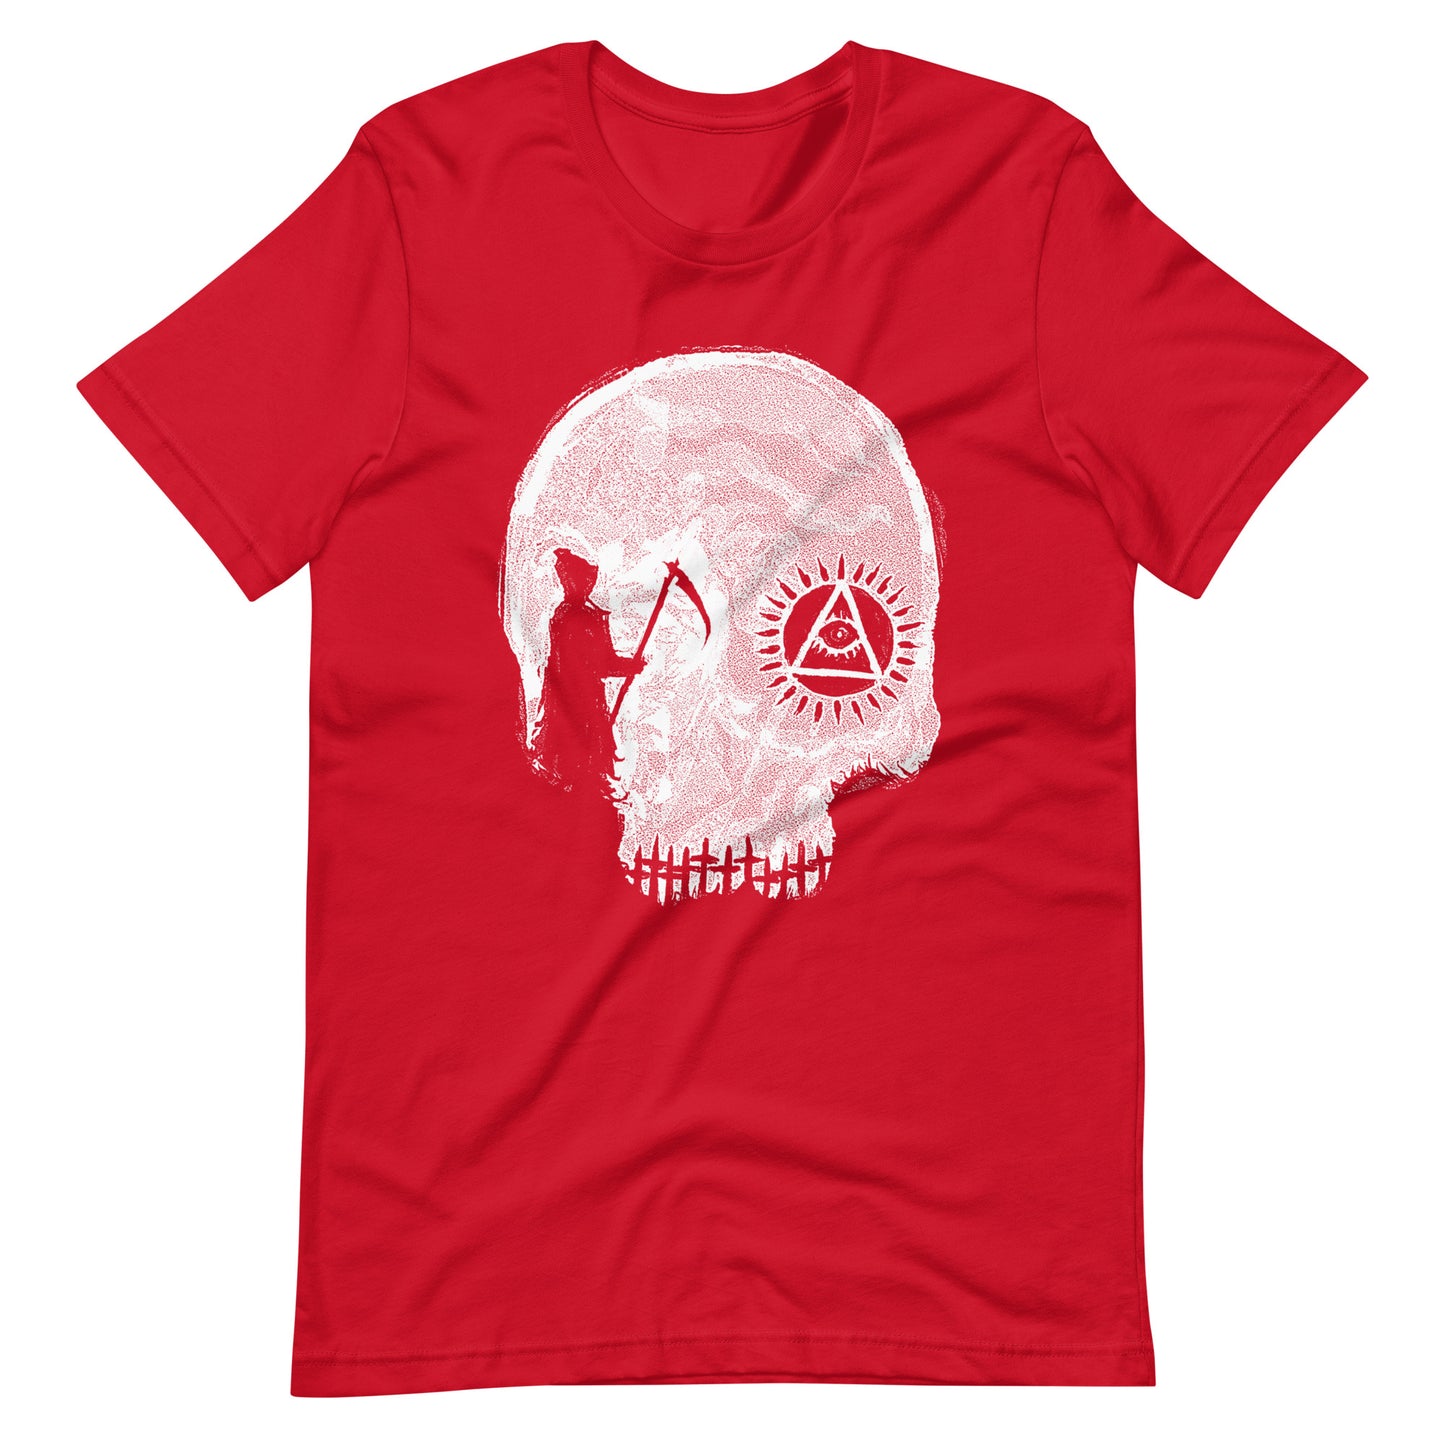 Death Row - Men's t-shirt - Red Front